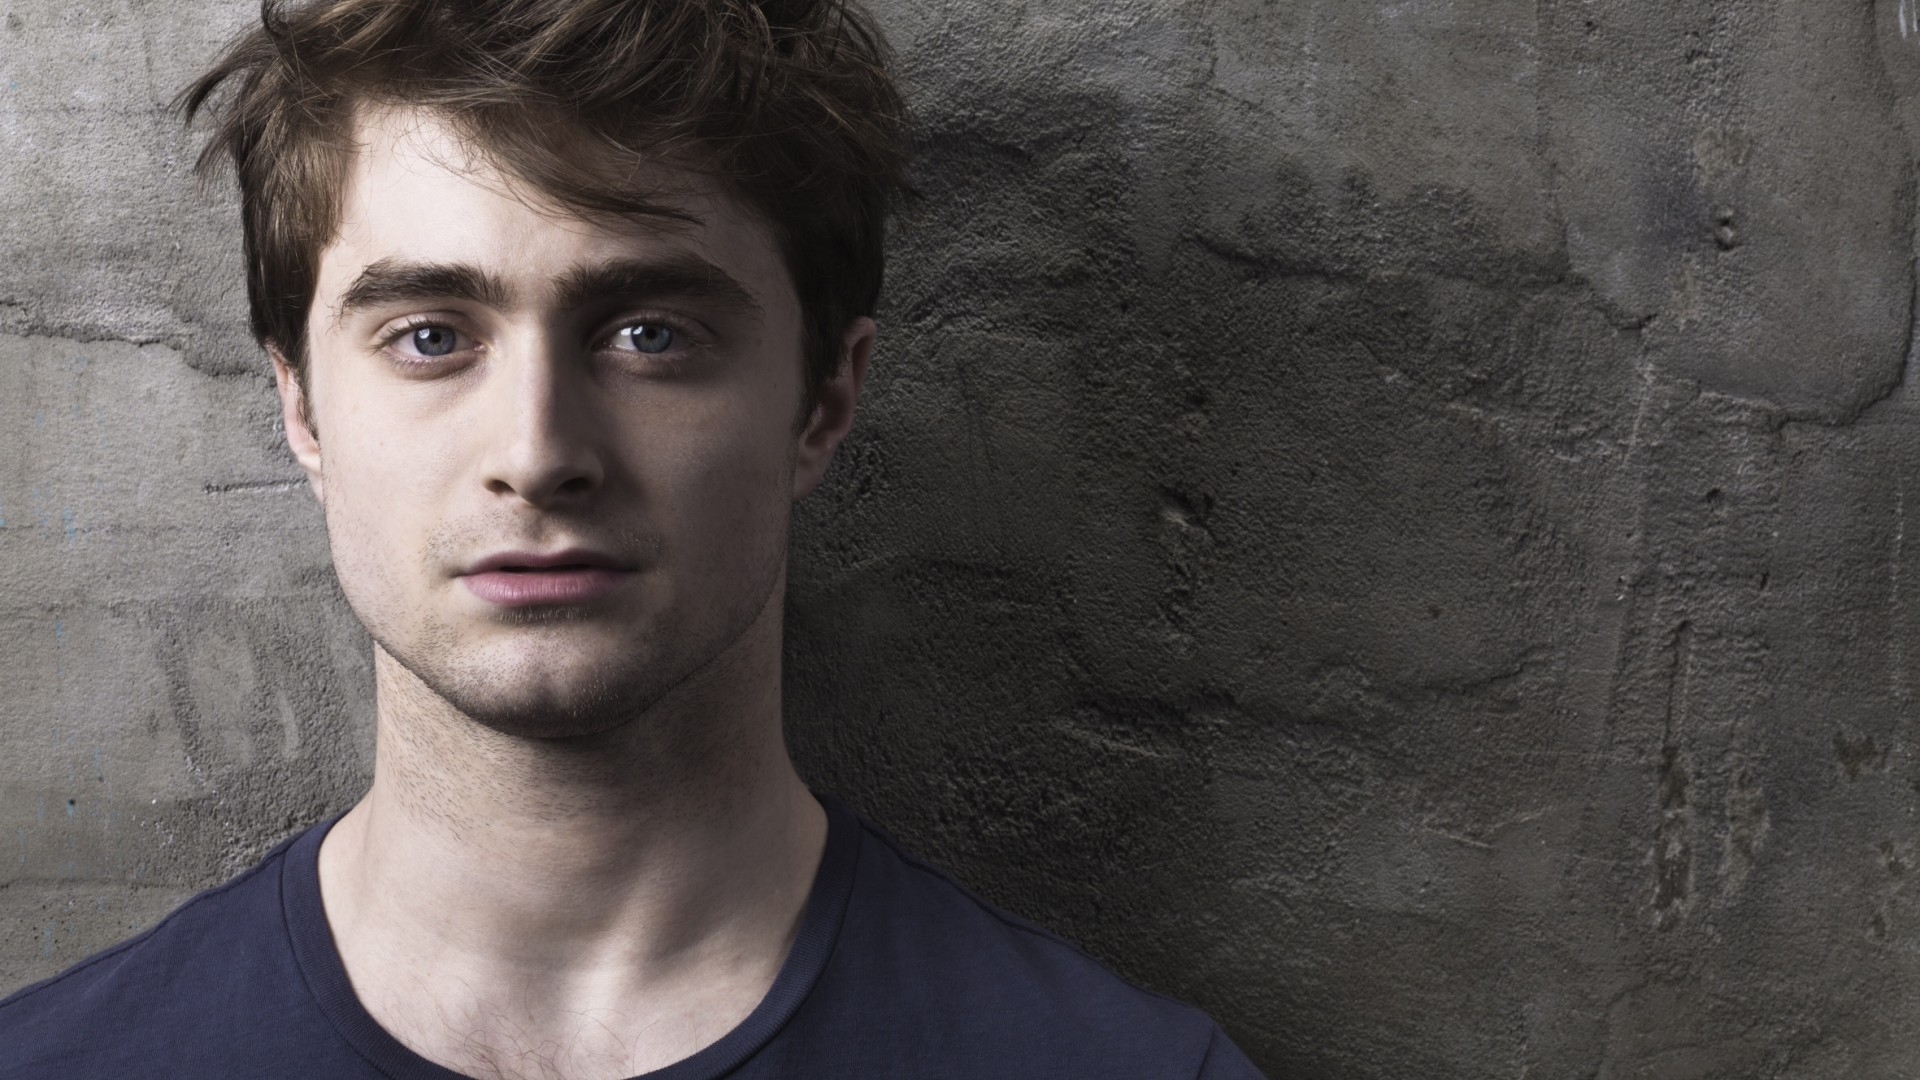 Daniel Radcliffe Look for 1920 x 1080 HDTV 1080p resolution